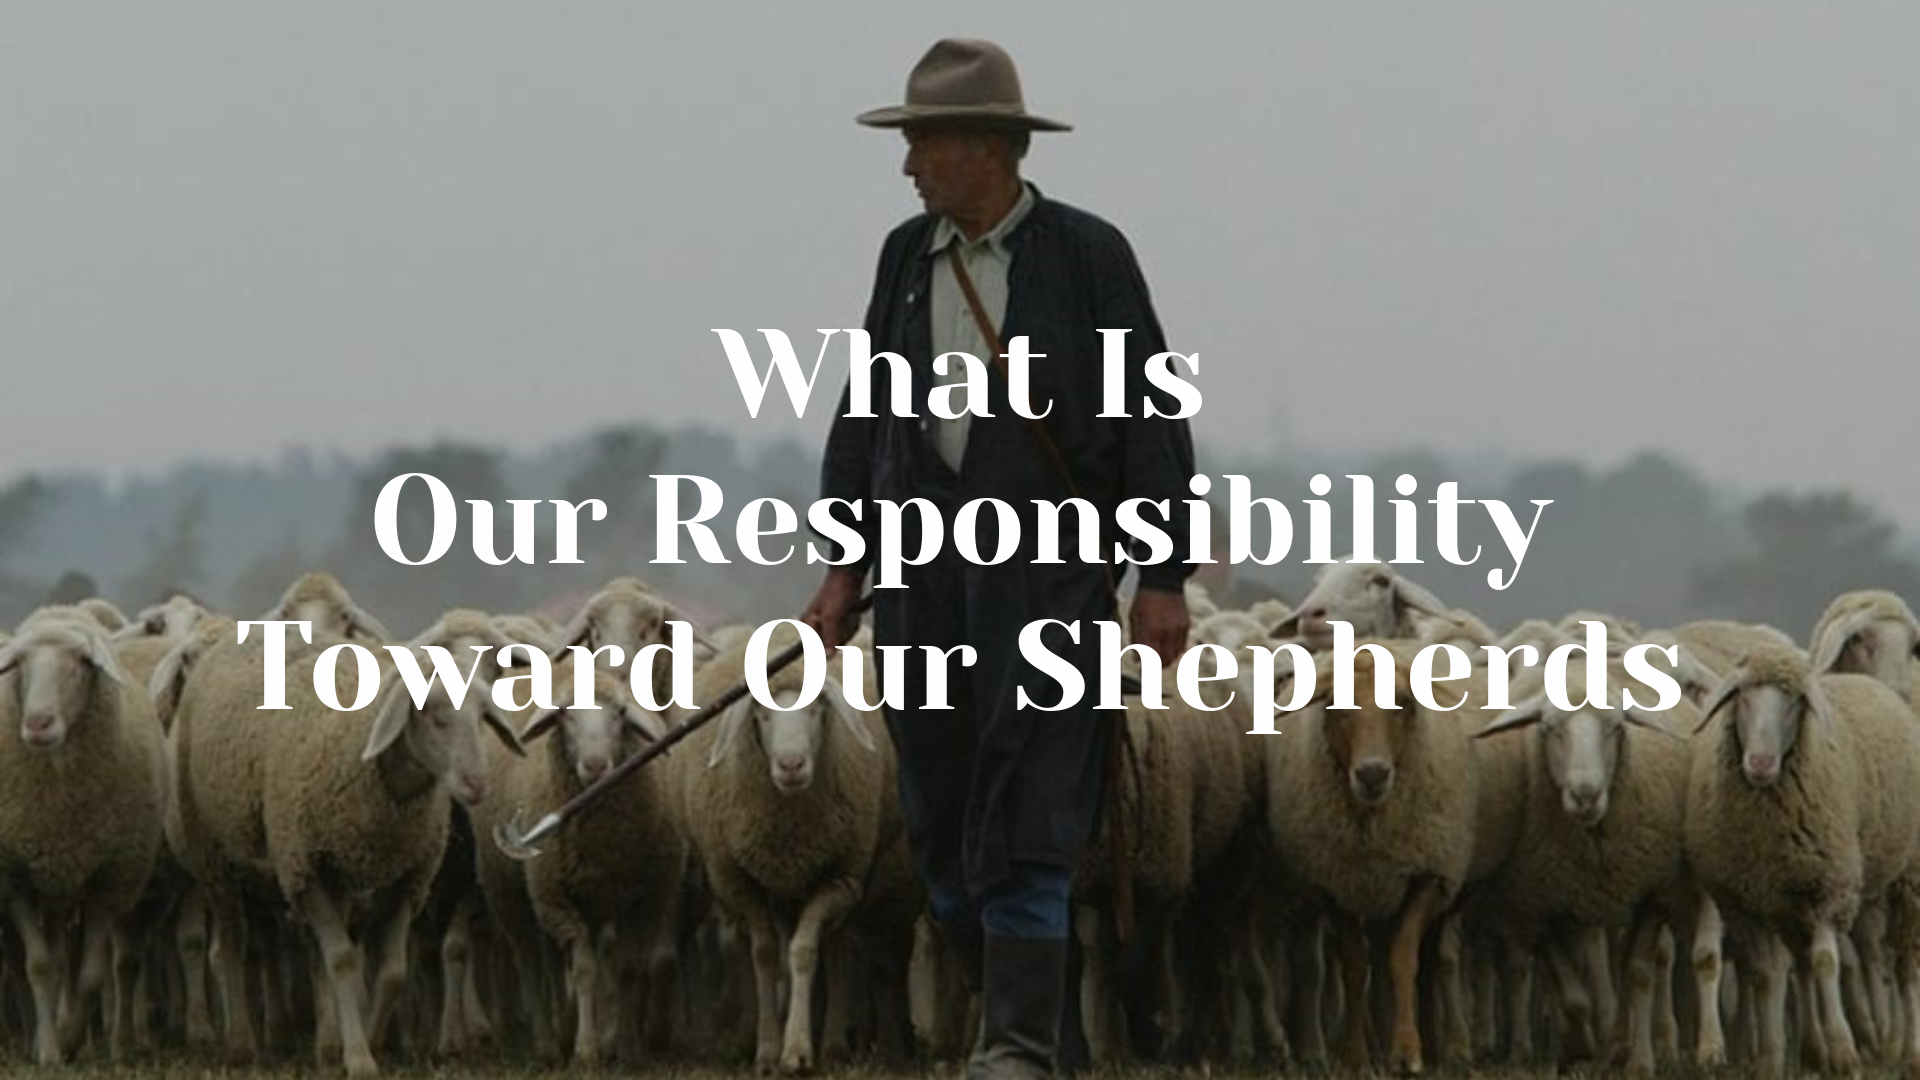 What Is Our Responsibility Toward Our Shepherds?